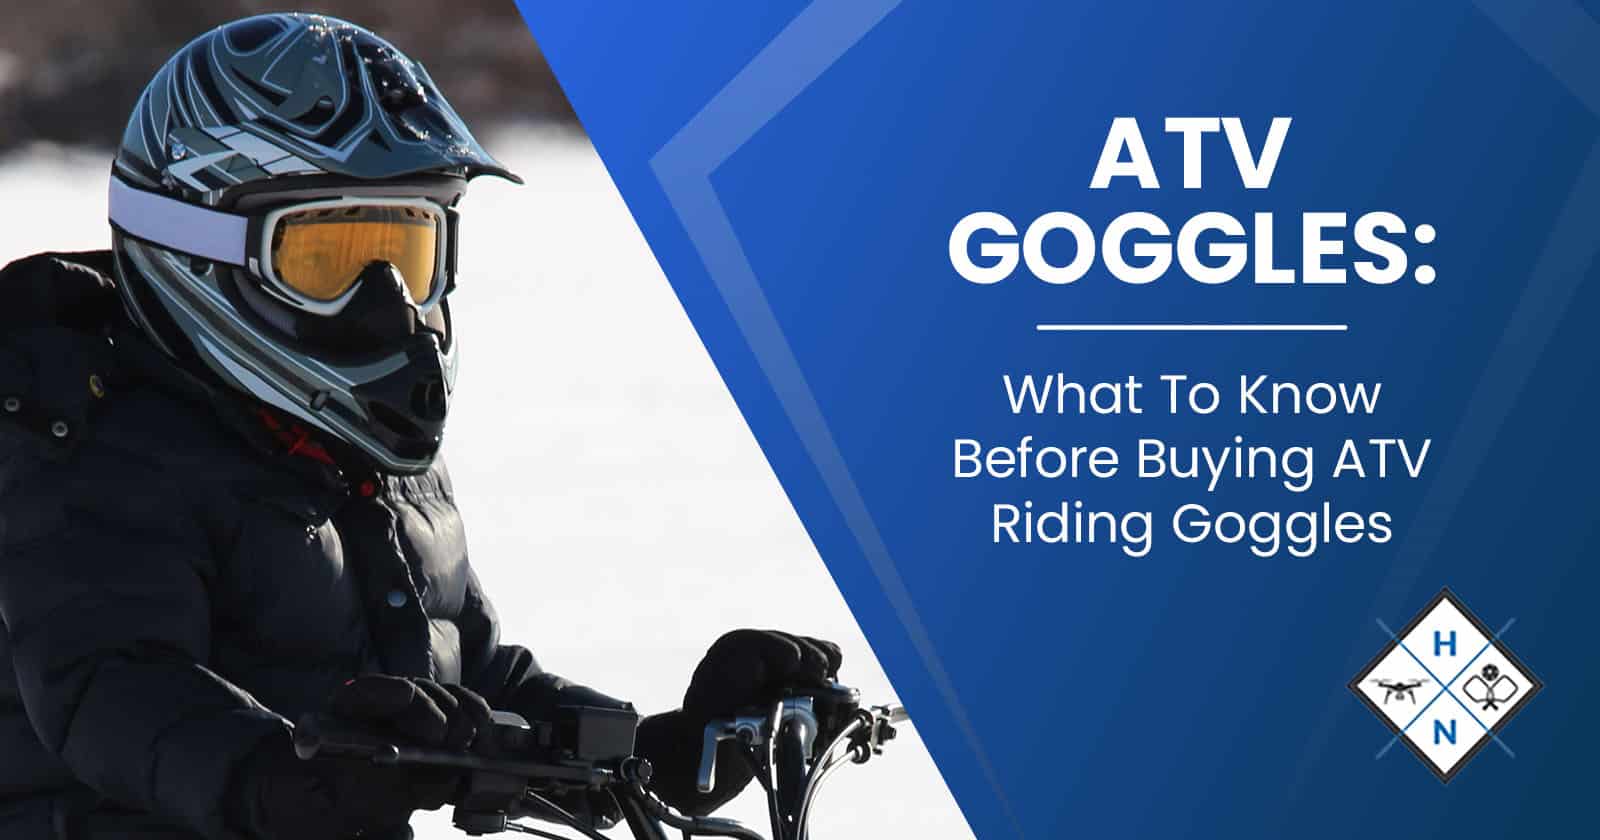 ATV Goggles: What To Know Before Buying ATV Riding Goggles